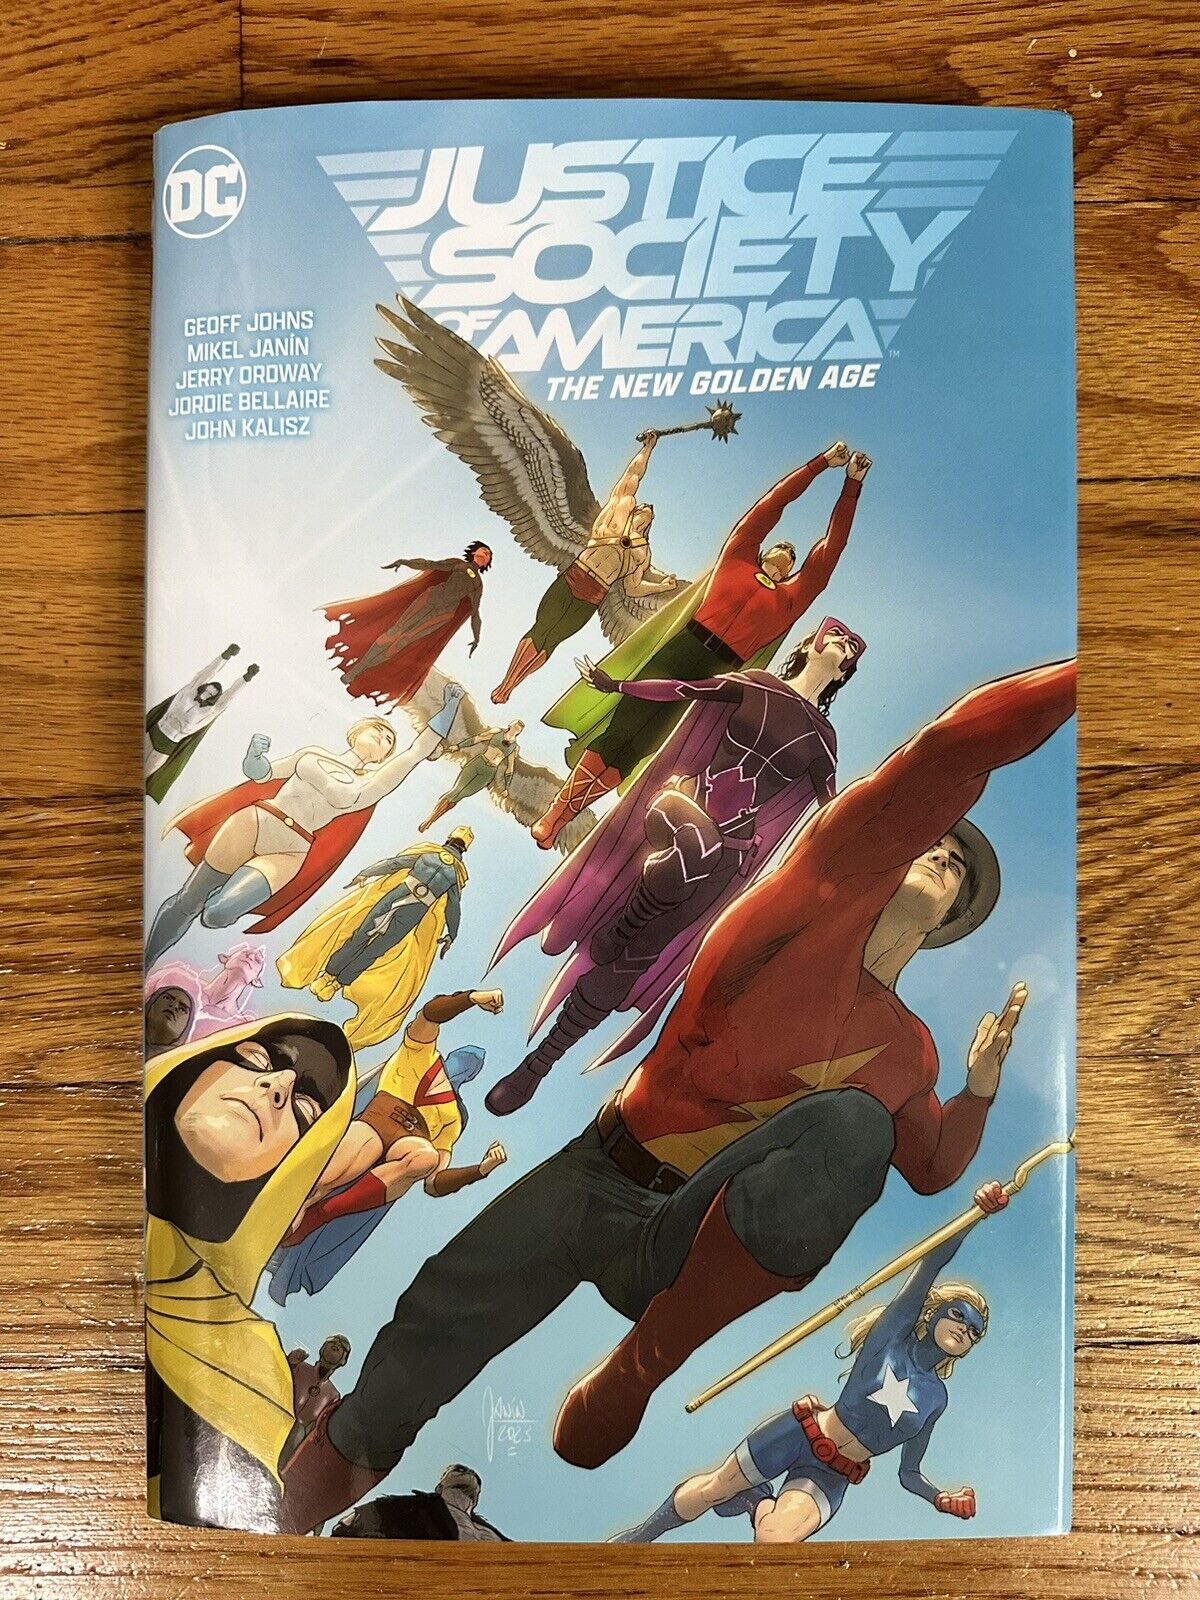 Justice Society of America Vol 1: The New Golden Age, Hardcover HC DC Johns